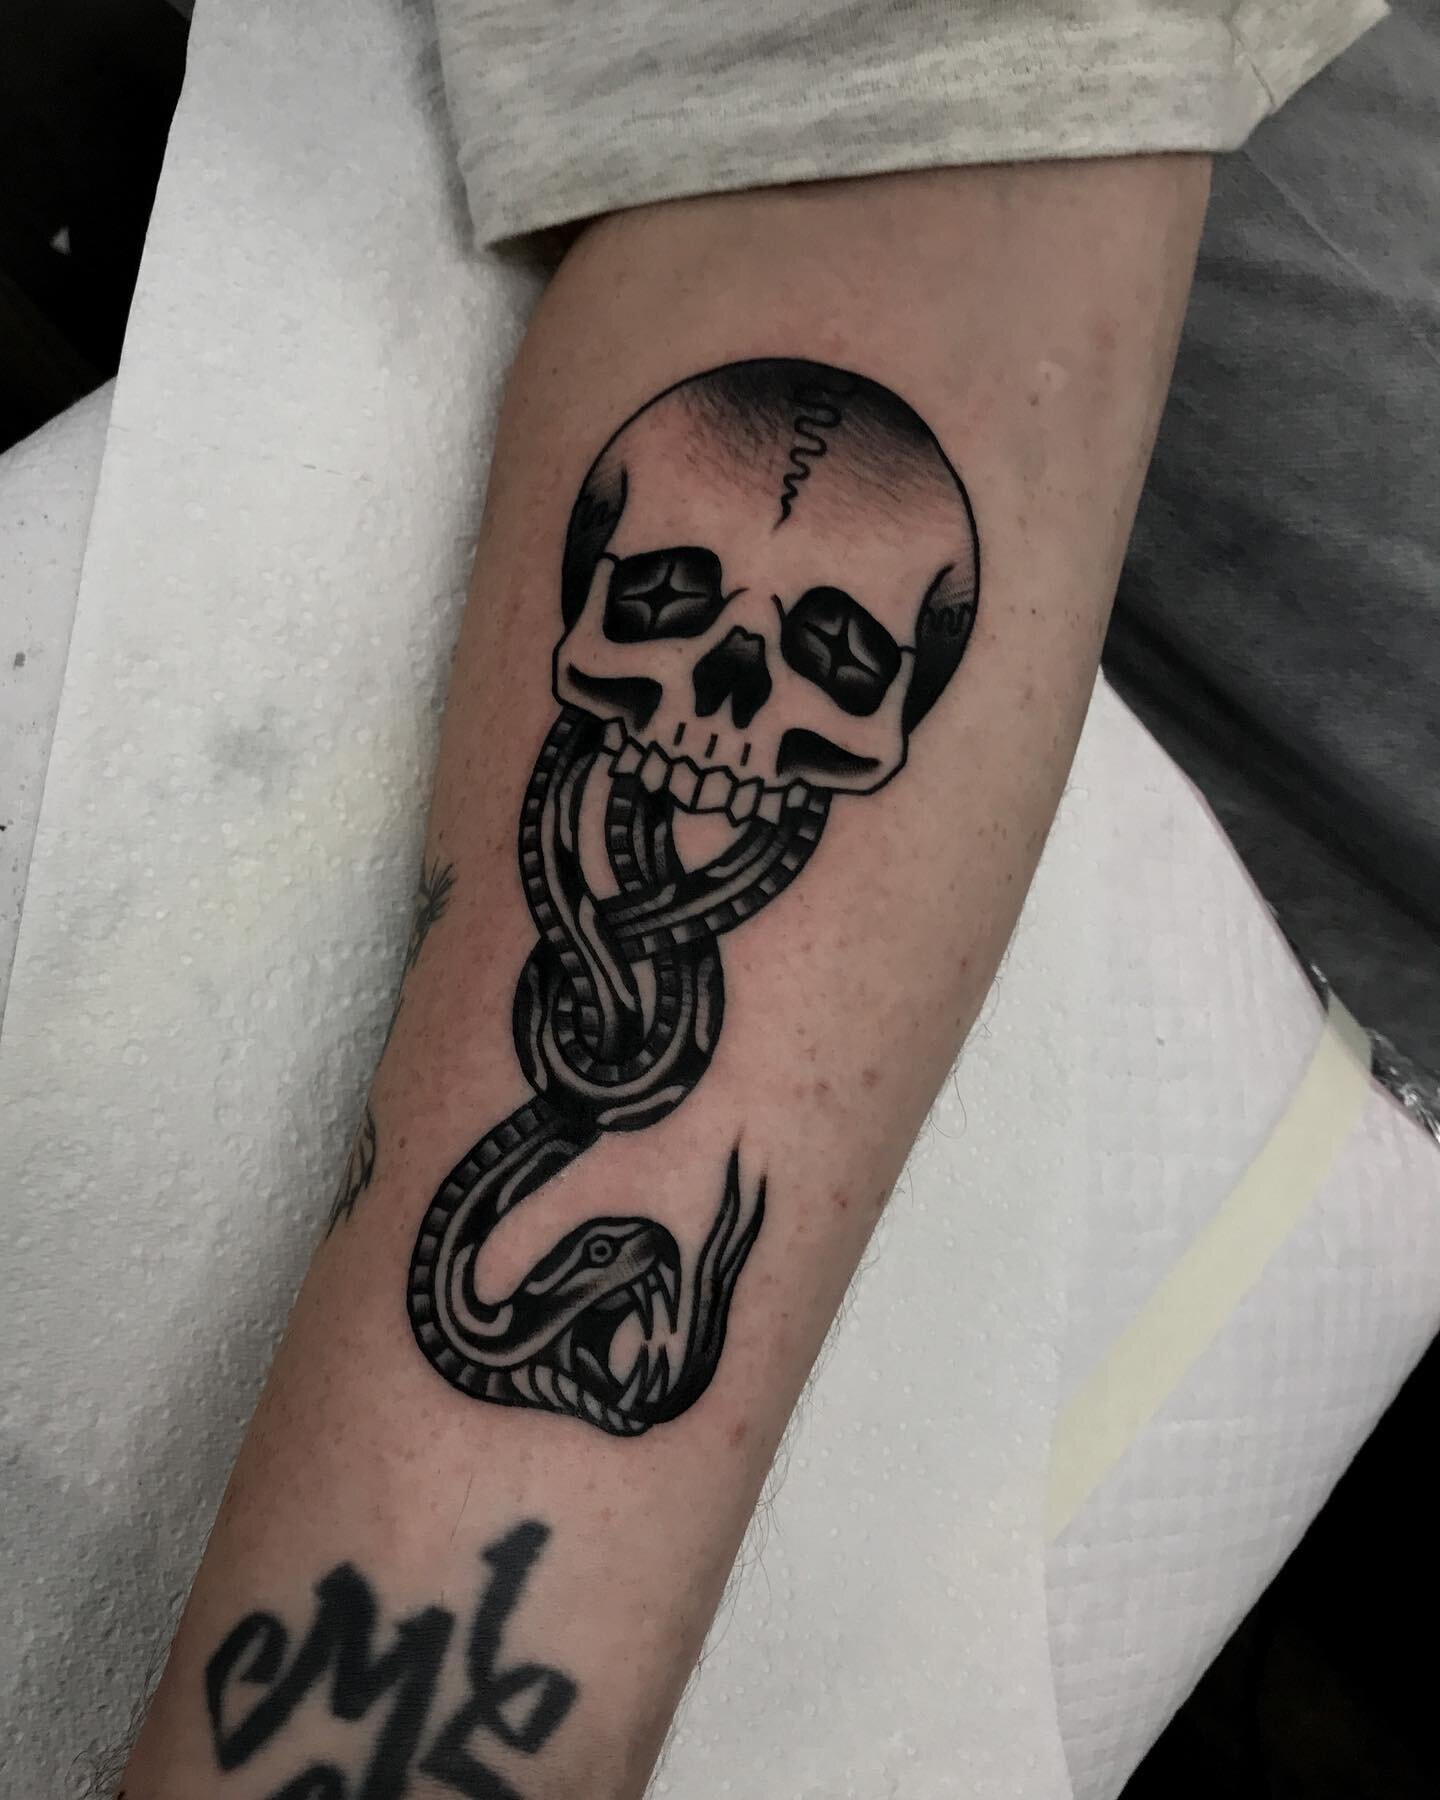 I did this Dark Mark tatt on @isaacflaherty from @satincali a while back. Turns out they&rsquo;re awesome, you should definitely give them a listen!
.
.
.
#Boldtattoos #radtrad #besttradtattoos #tradworkers #boldtattooart #sydneytattooist #thirroulgu